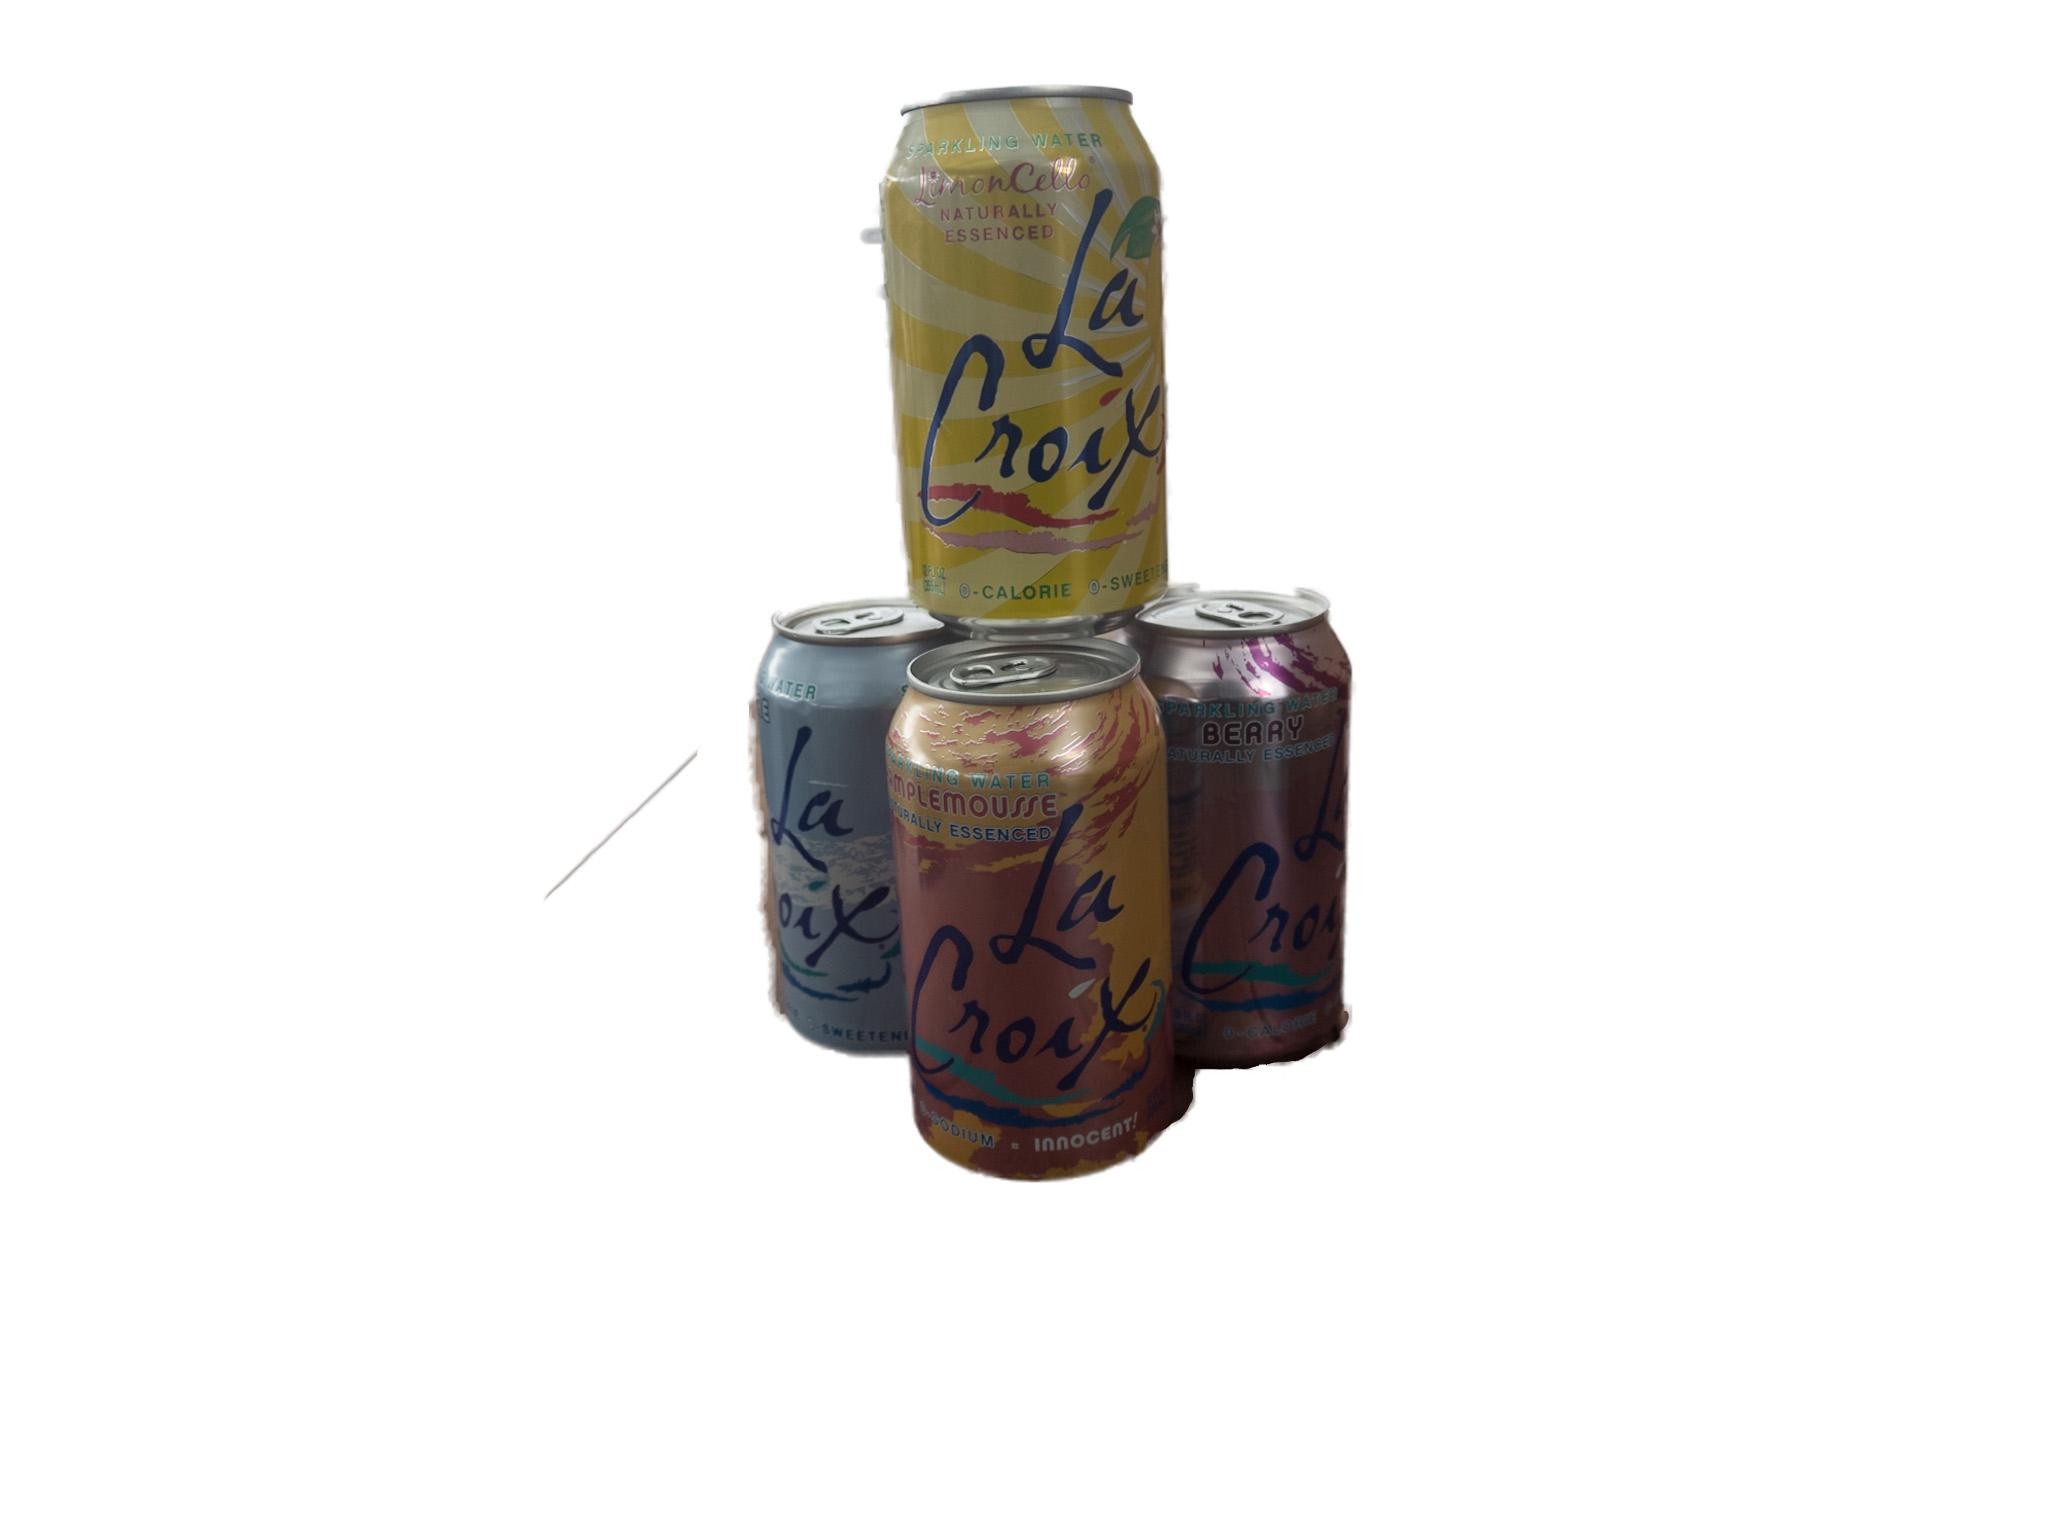 Canned Sodas